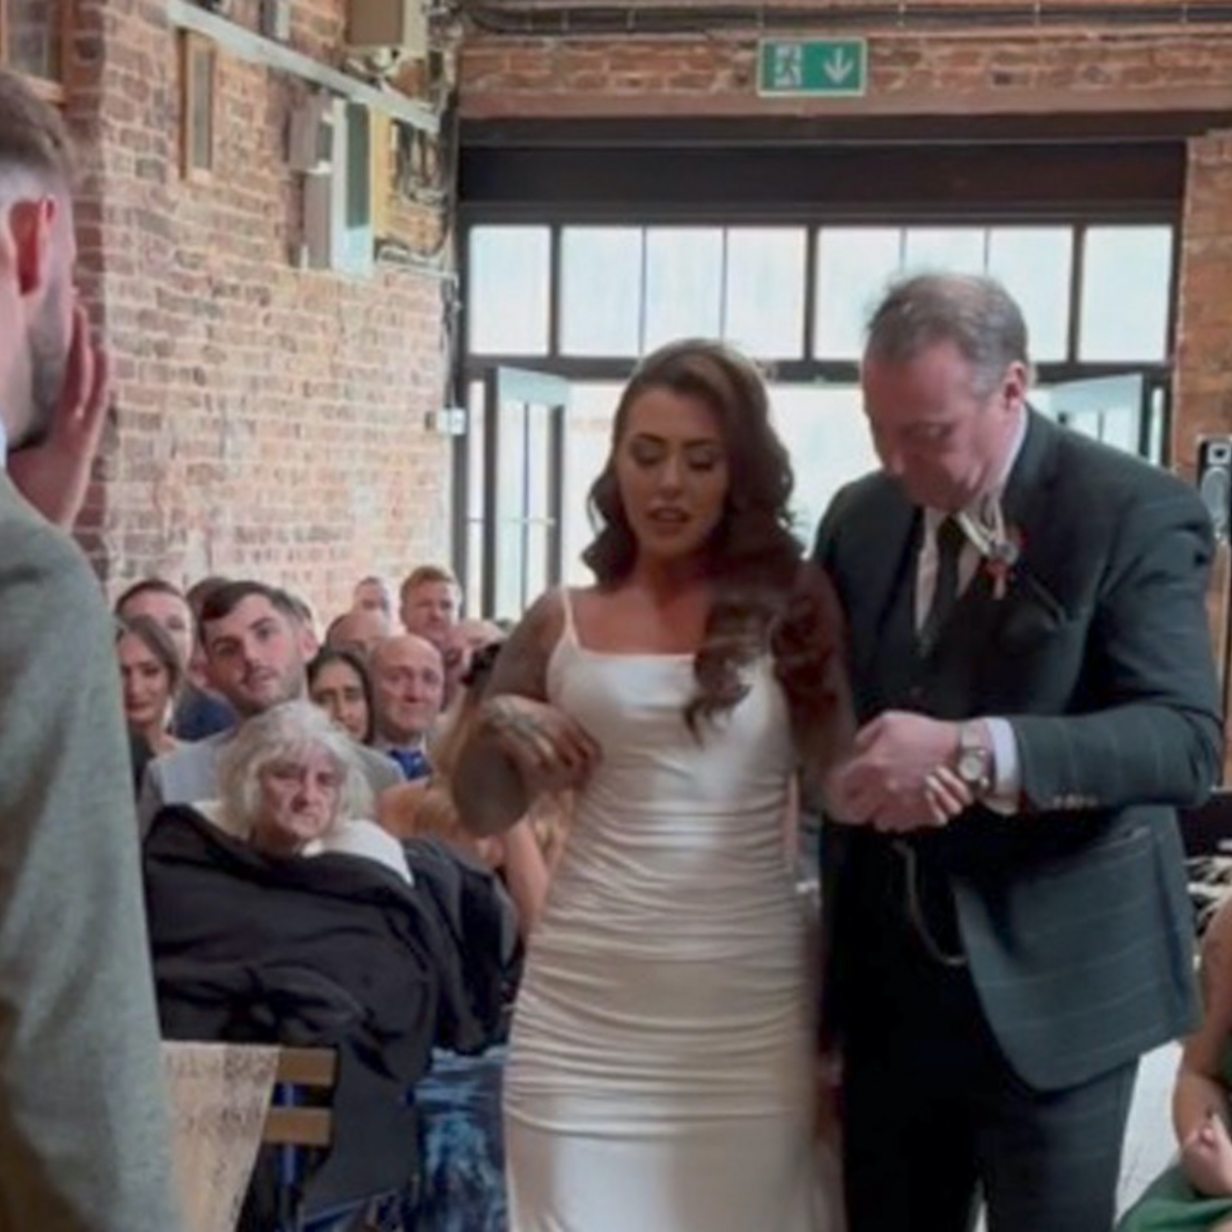 Fiance's shock at bride-to-be's walk down aisle at East Yorkshire wedding -  BBC News